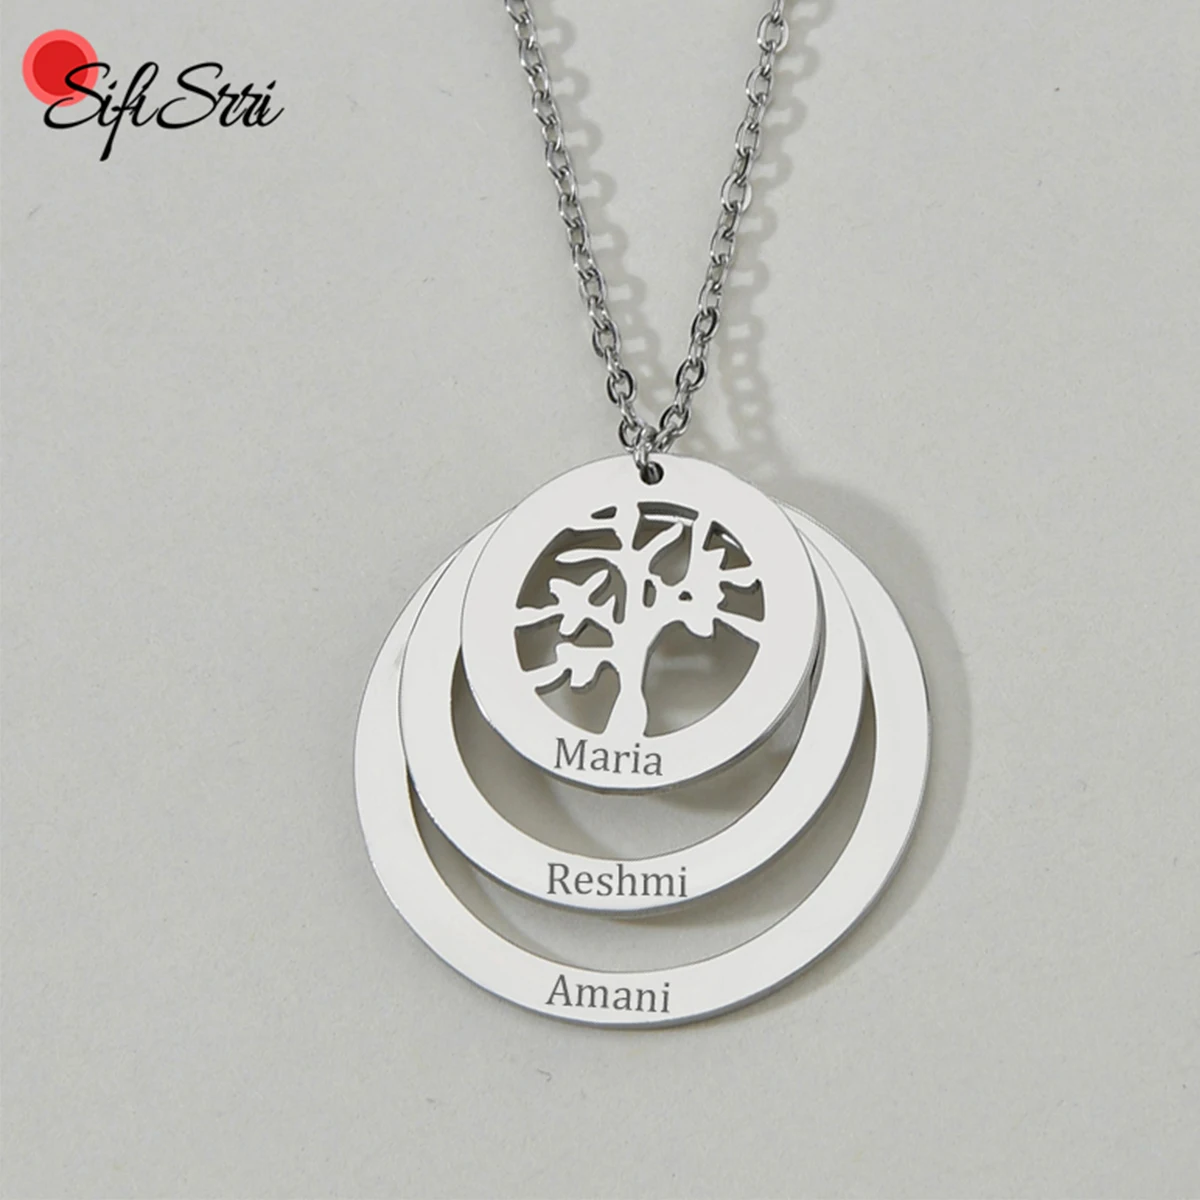 

Sifisrri Personalized Engrave Family Names Necklaces for Women Men Stainless Steel Custom Lifetree Choker Chain Jewelry Gift